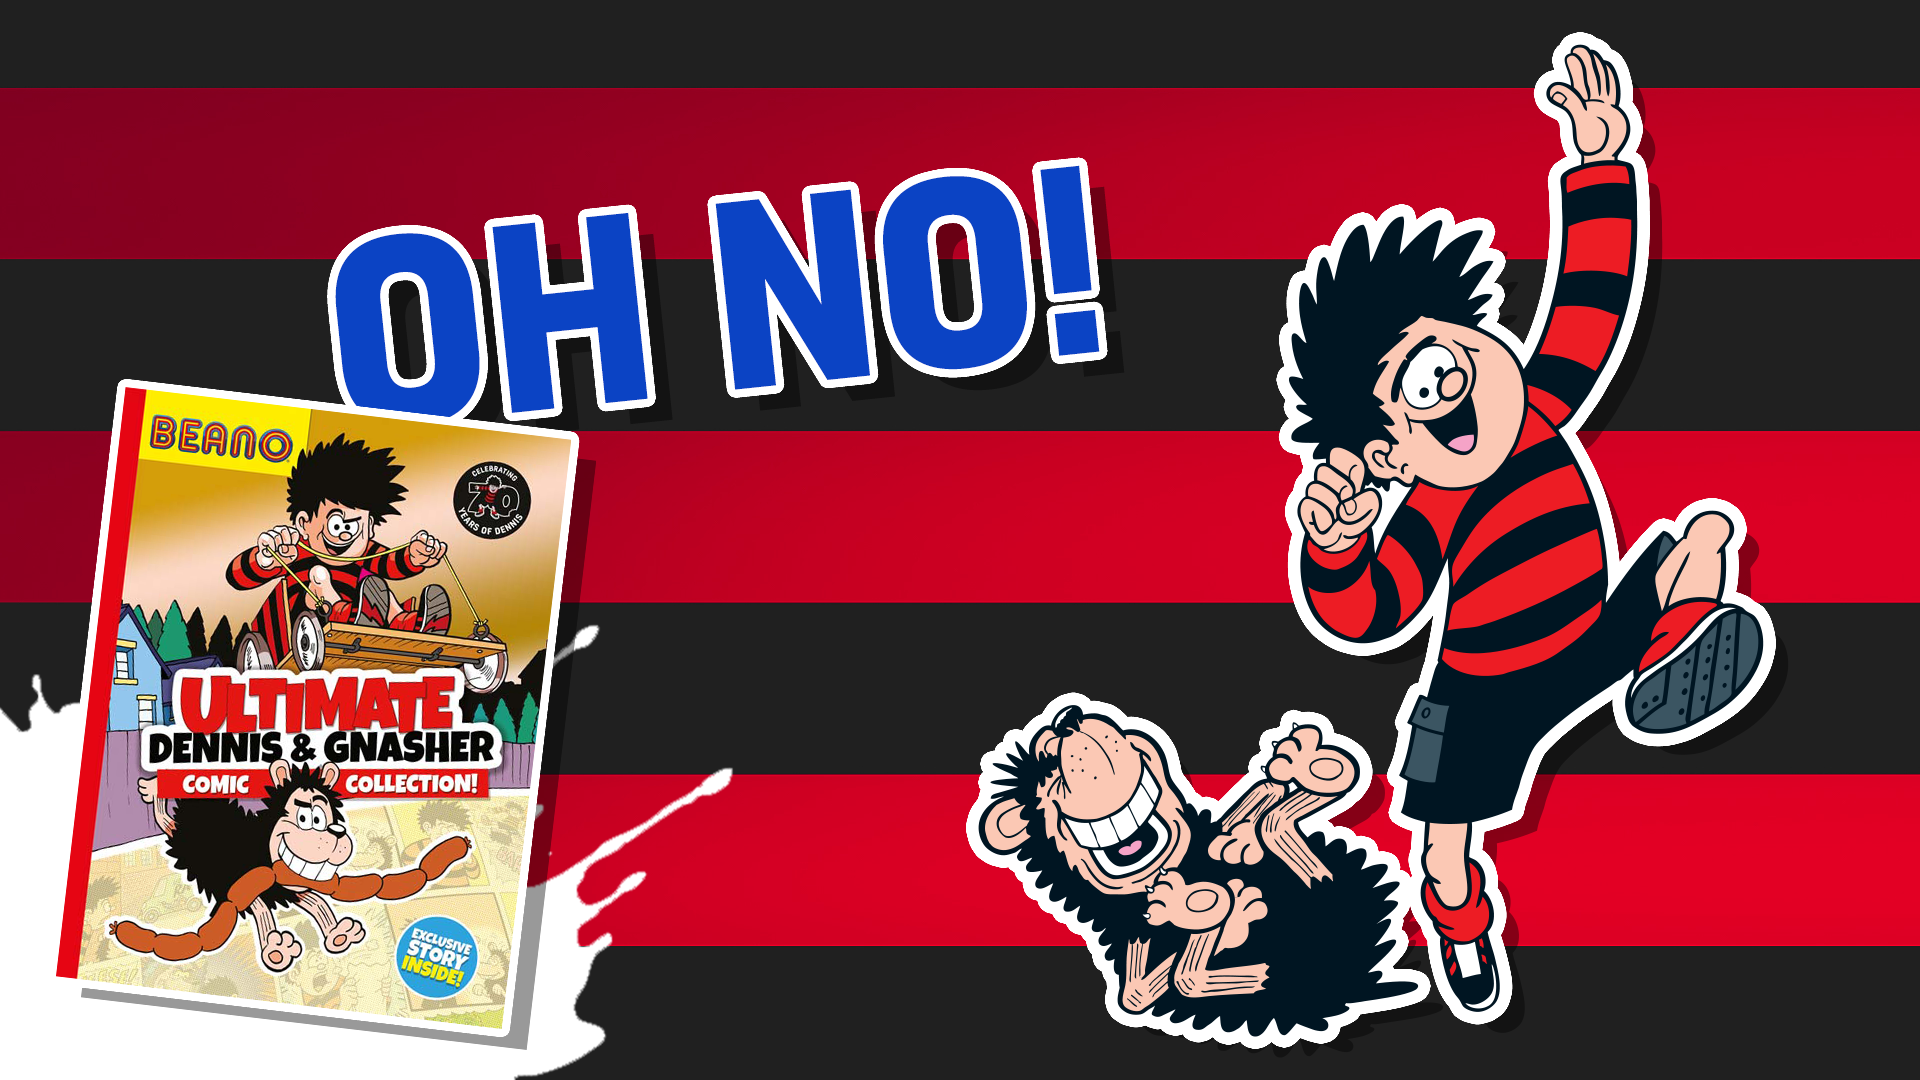 Dennis and Gnasher quiz result: Oh no